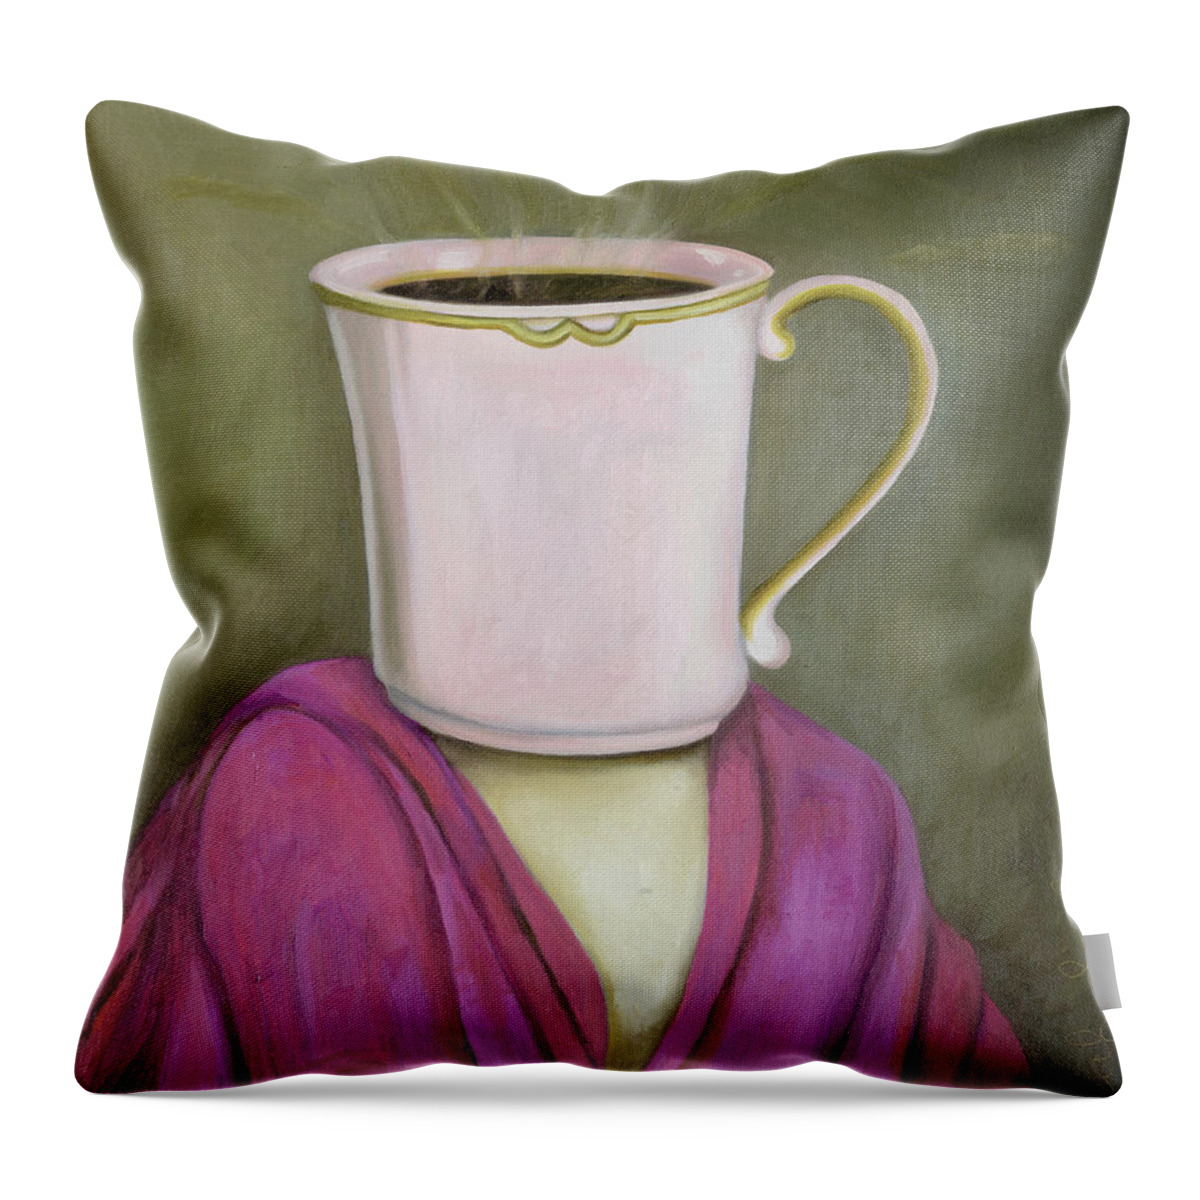 Coffee Throw Pillow featuring the painting Coffee Head 2 by Leah Saulnier The Painting Maniac